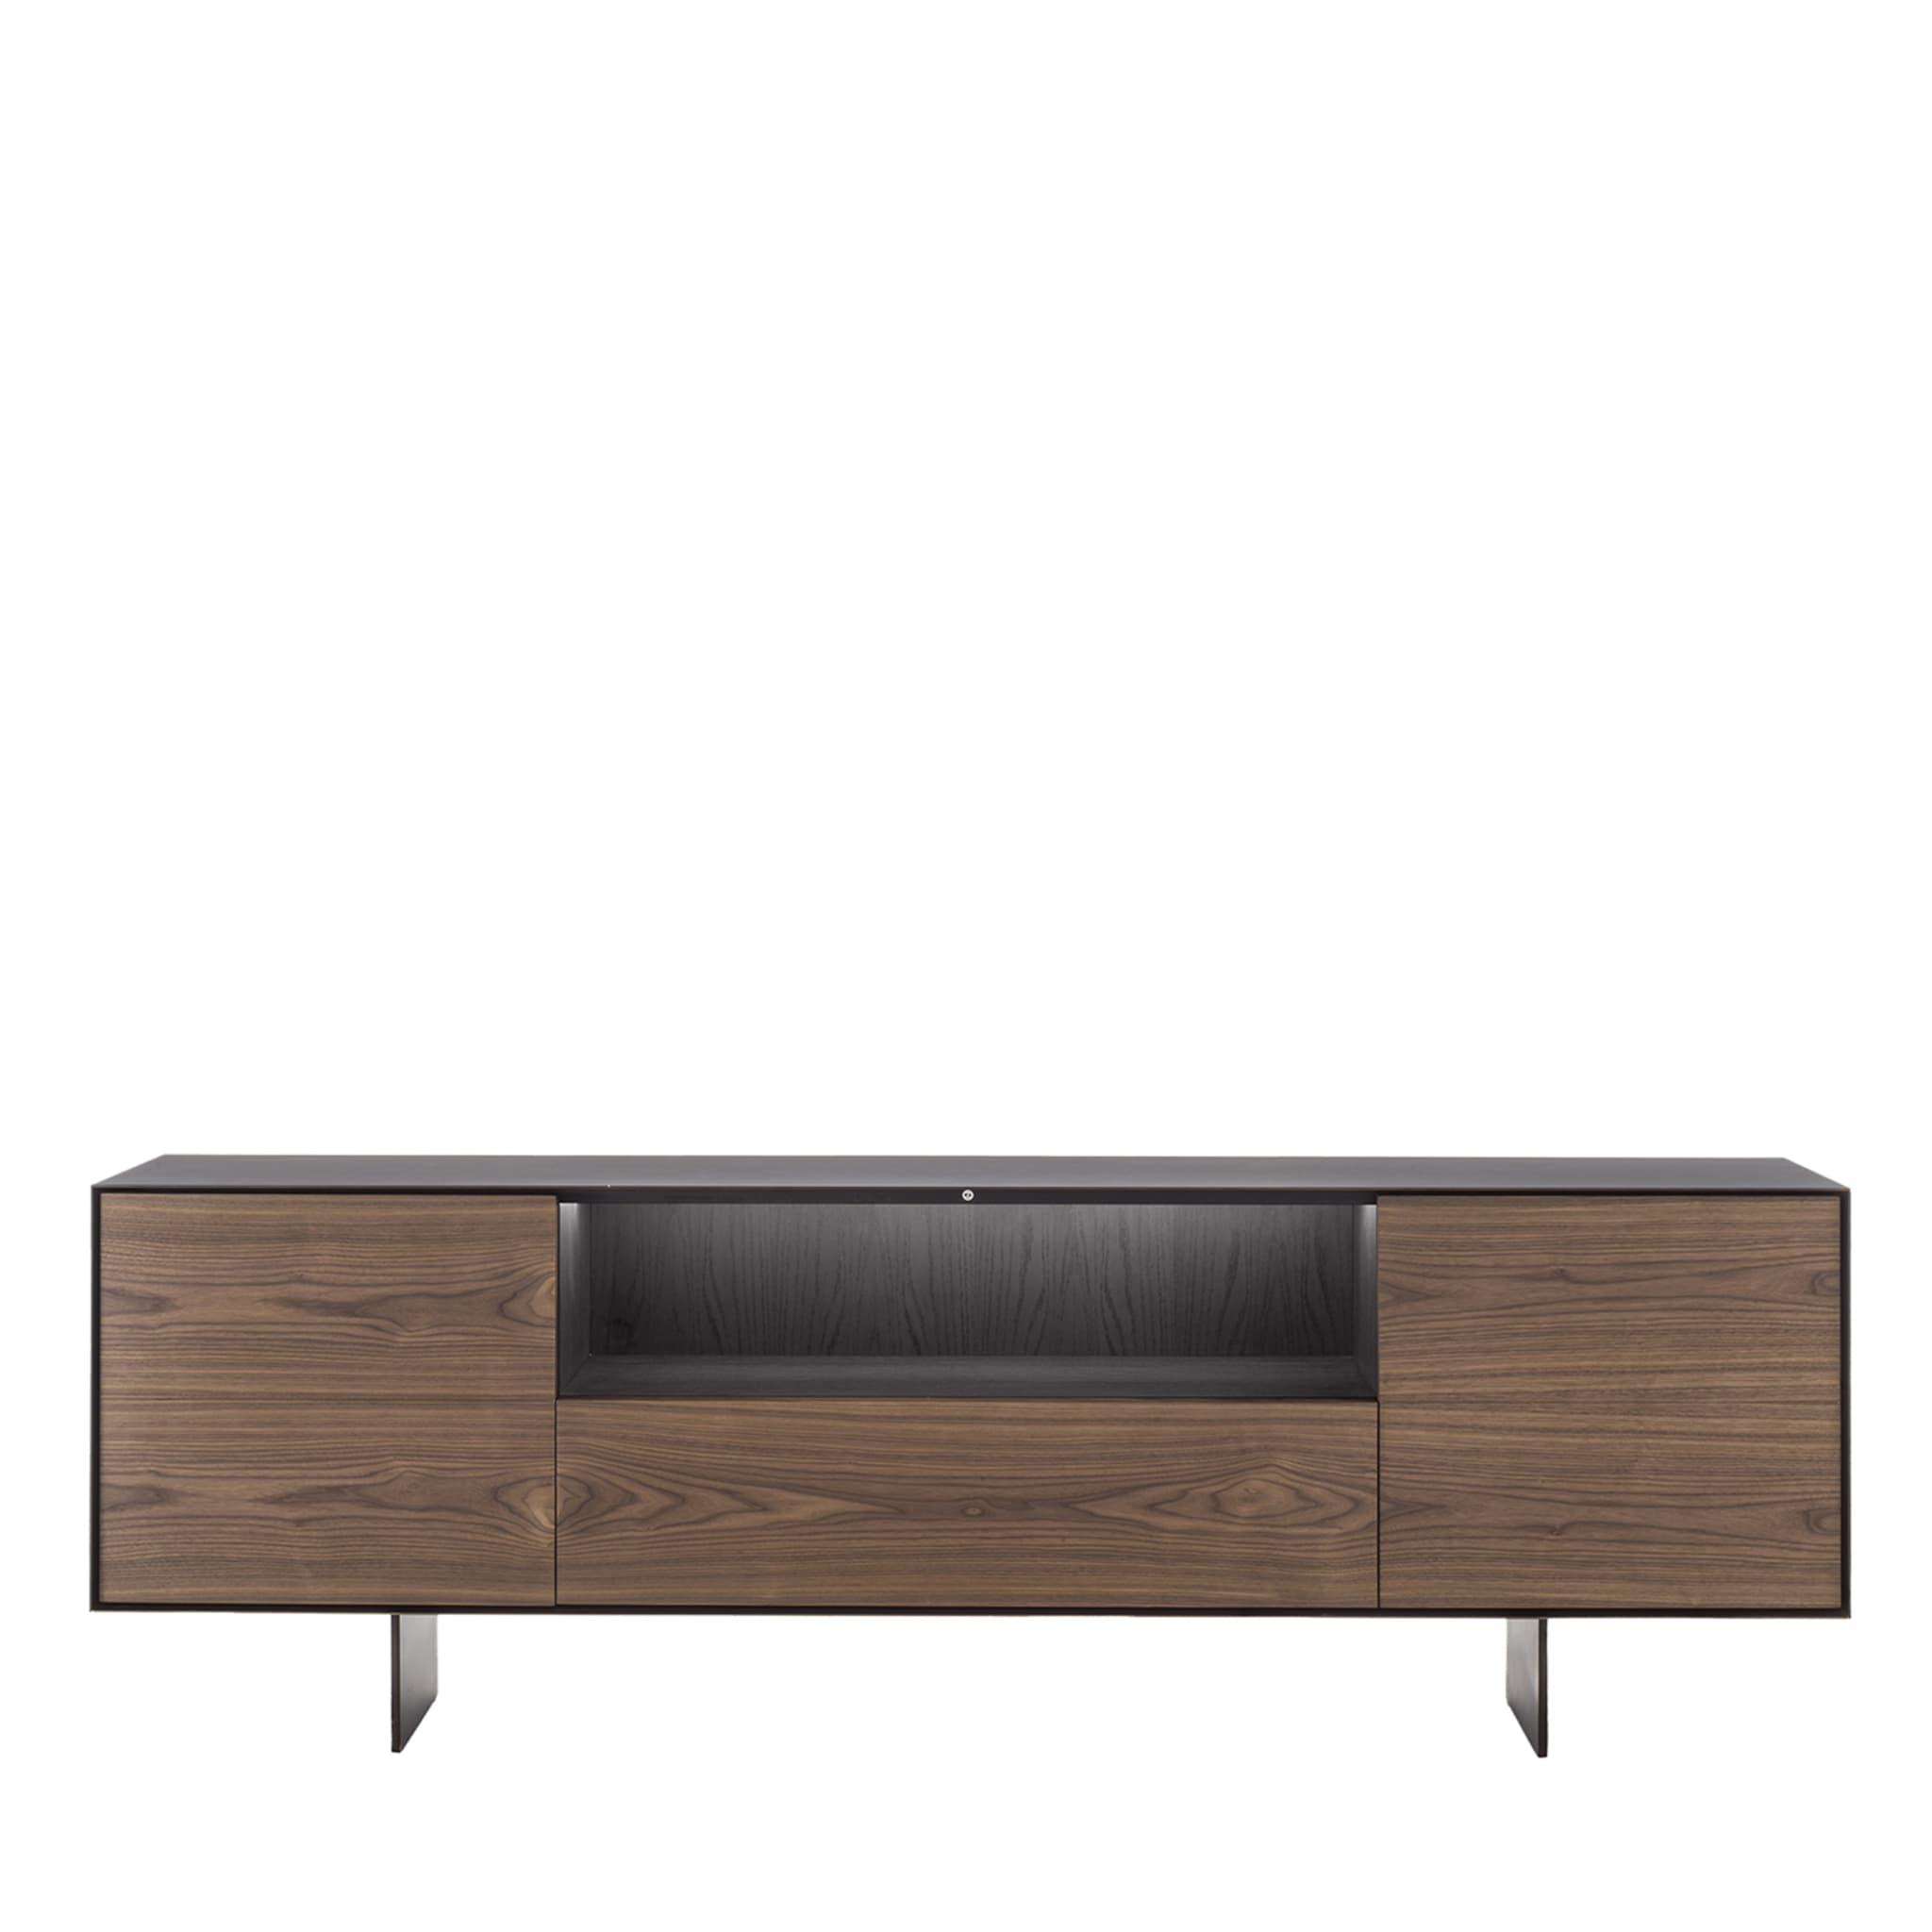 Rialto Fly Open Sideboard by Giuliano Cappelletti - Main view